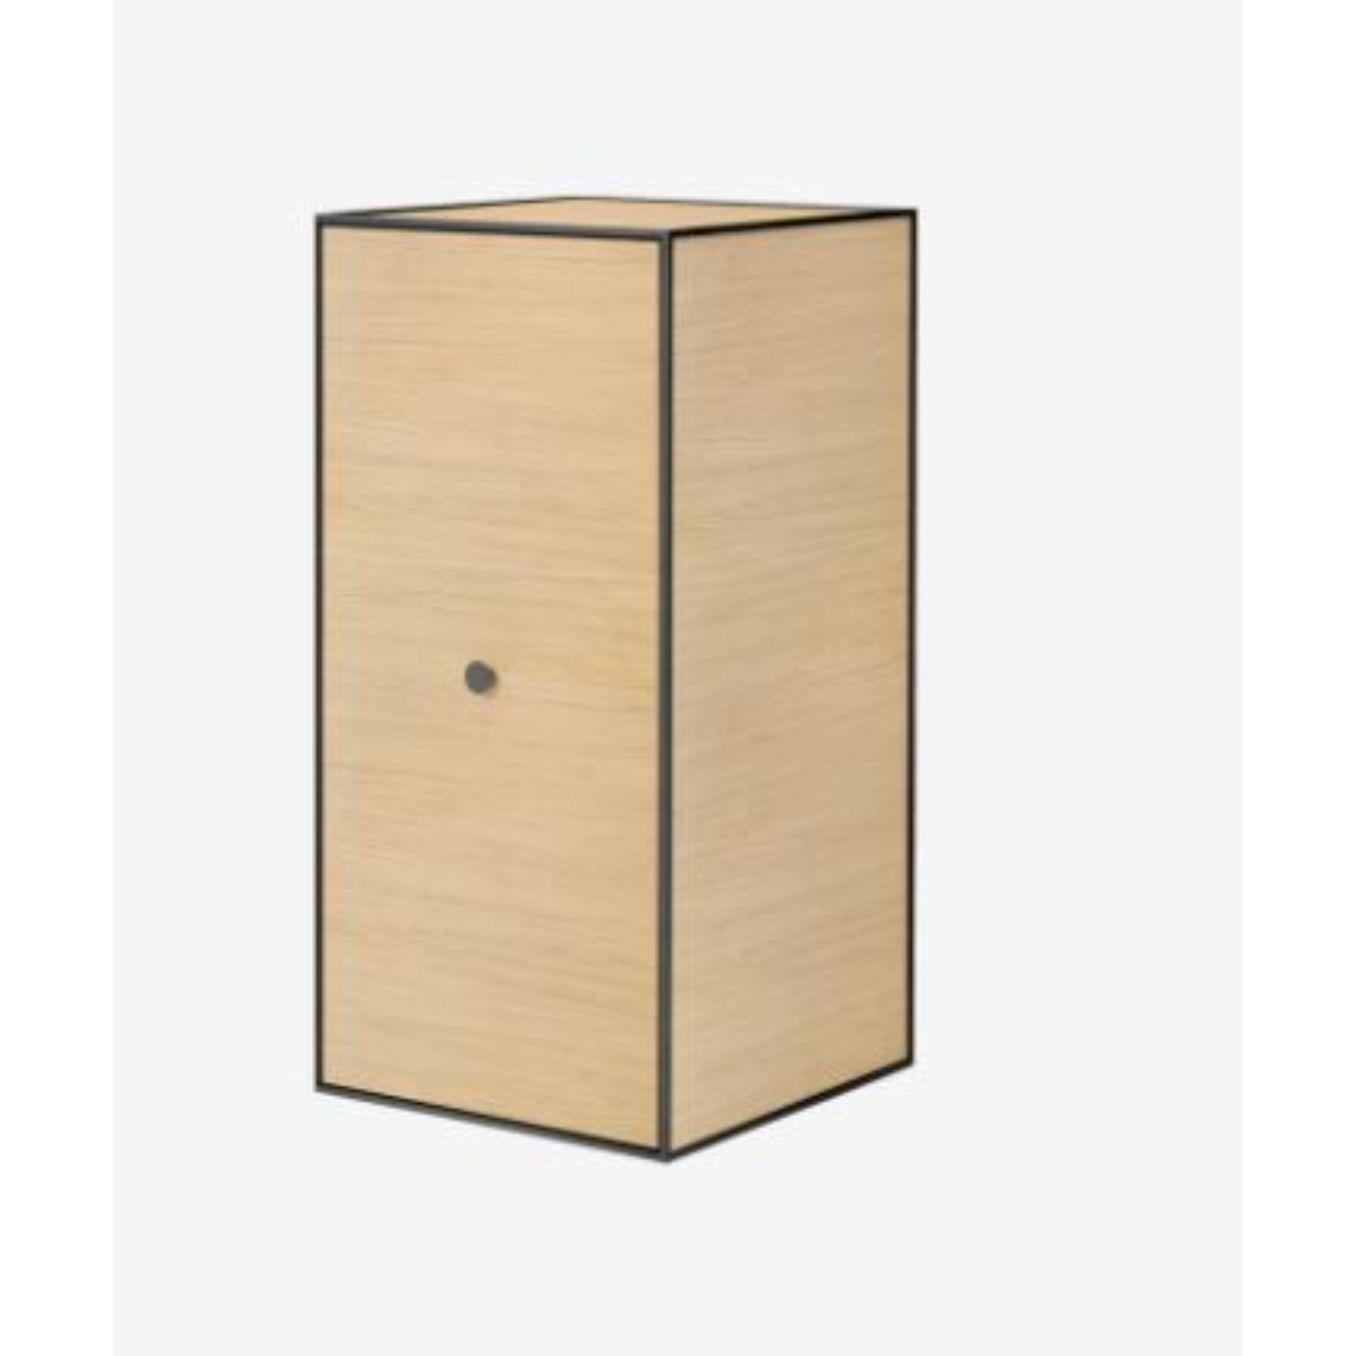 70 oak frame box with 2 shelves / door by Lassen
Dimensions: D 35 x W 35 x H 70 cm 
Materials: Finér,melamin, melamin, melamine, metal, veneer, oak
Also available in different colours and dimensions. 
Weight: 13 kg


By Lassen is a Danish